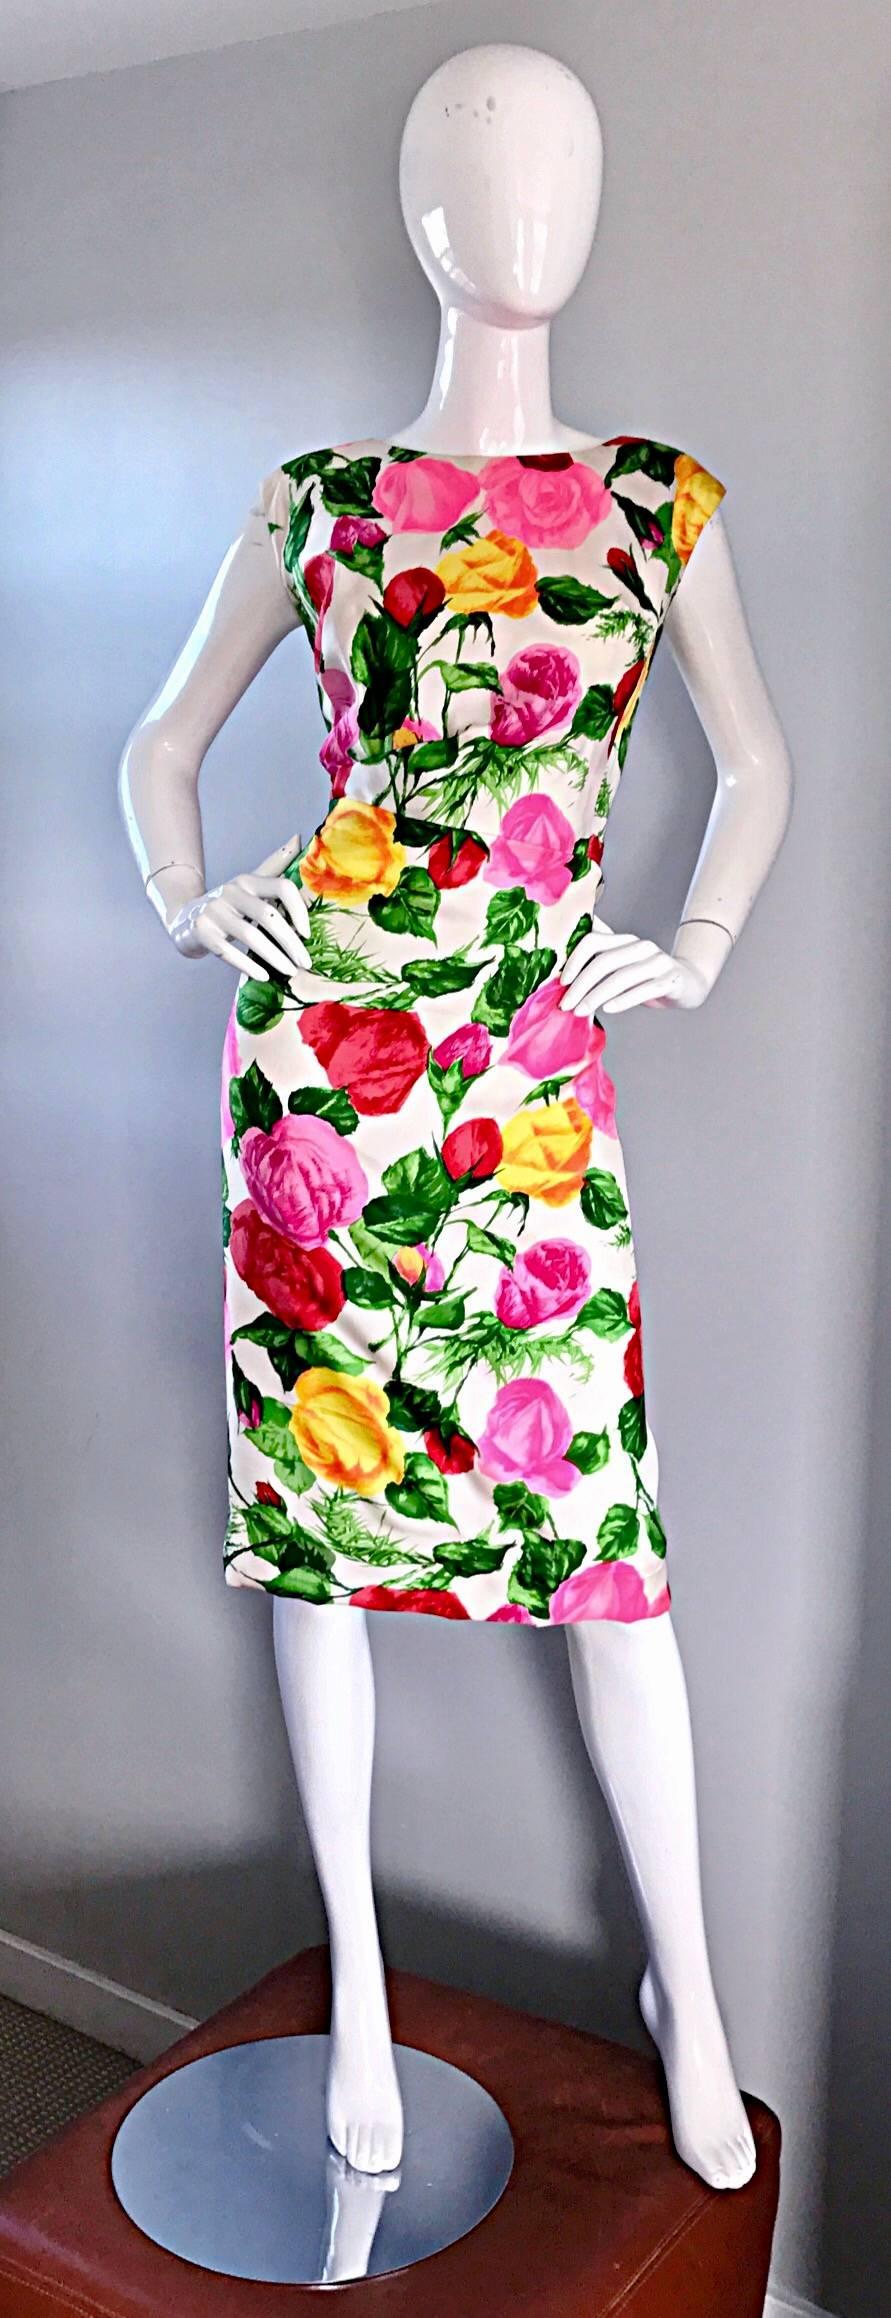 Absolutely breathtaking late 1950s early 1960s rose print Demi couture dress! Words cannot even begin to describe the utter beauty of this little gem! Fantastic fit that hugs the body in all the right places. Extremely soft silk. Vibrant prints of